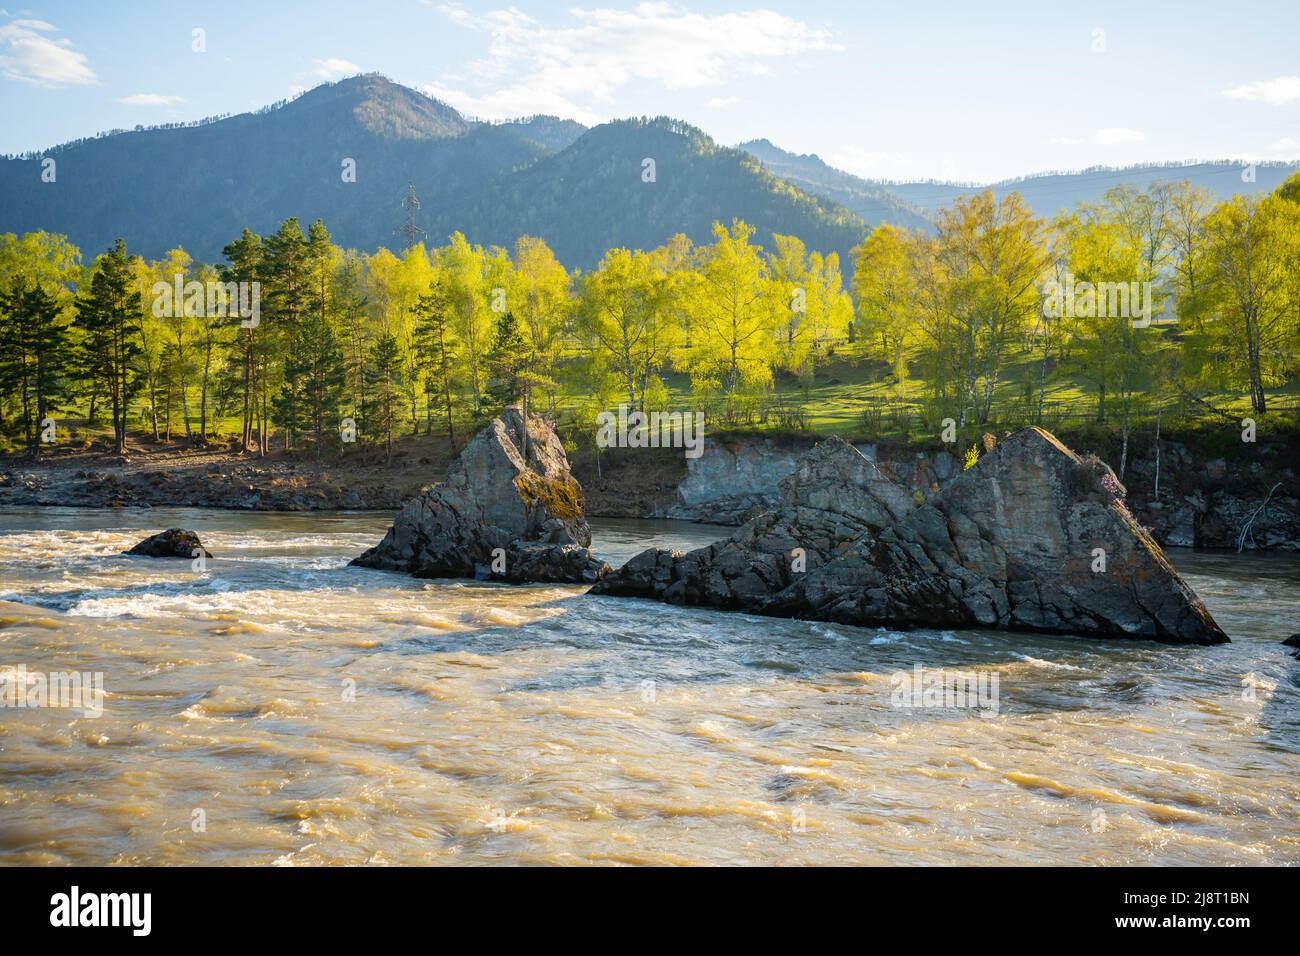 Remarkable natural objects - dragon teeth - in Katun river of Altai mountains with beautiful taiga area on background, Siberia, Russia Stock Photo